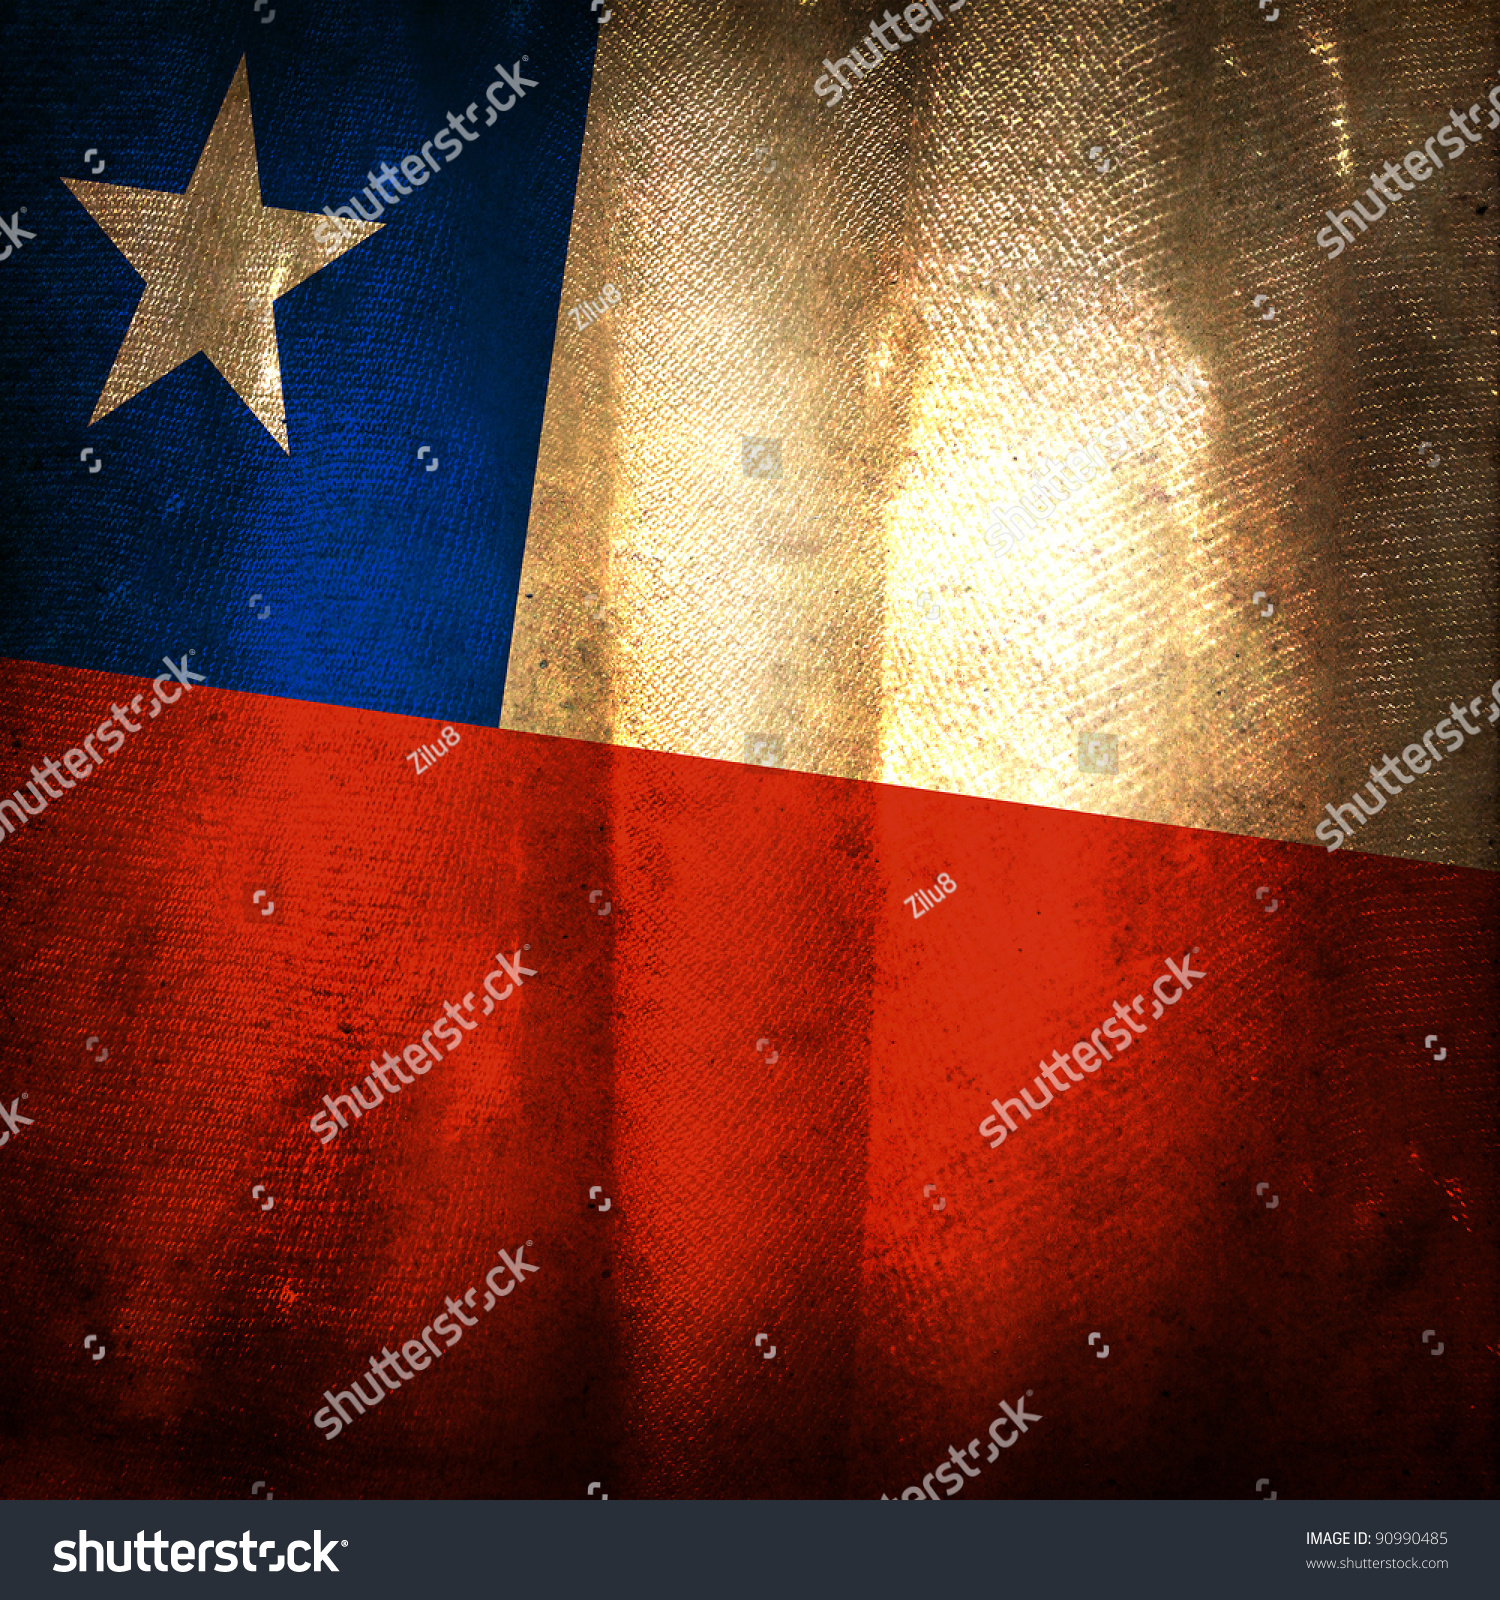 Old Grunge Flag Chile Stock Photo 90990485 - Shutterstock